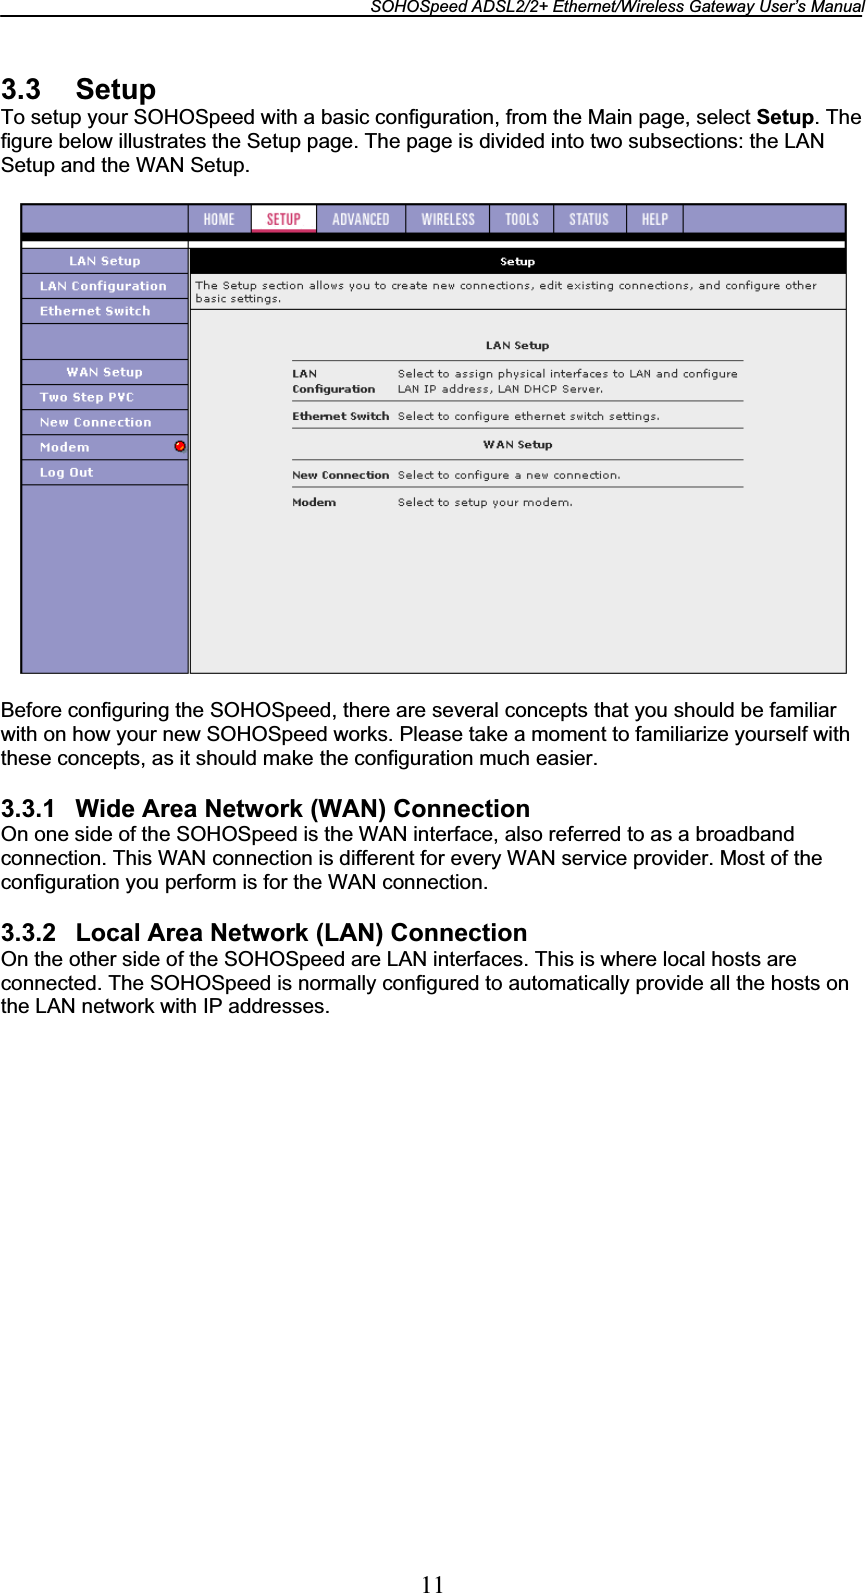 SOHOSpeed ADSL2/2+ Ethernet/Wireless Gateway User’s Manual 113.3 Setup To setup your SOHOSpeed with a basic configuration, from the Main page, select Setup. The figure below illustrates the Setup page. The page is divided into two subsections: the LAN Setup and the WAN Setup. Before configuring the SOHOSpeed, there are several concepts that you should be familiar with on how your new SOHOSpeed works. Please take a moment to familiarize yourself with these concepts, as it should make the configuration much easier. 3.3.1  Wide Area Network (WAN) Connection On one side of the SOHOSpeed is the WAN interface, also referred to as a broadband connection. This WAN connection is different for every WAN service provider. Most of the configuration you perform is for the WAN connection. 3.3.2  Local Area Network (LAN) Connection On the other side of the SOHOSpeed are LAN interfaces. This is where local hosts are connected. The SOHOSpeed is normally configured to automatically provide all the hosts on the LAN network with IP addresses. 